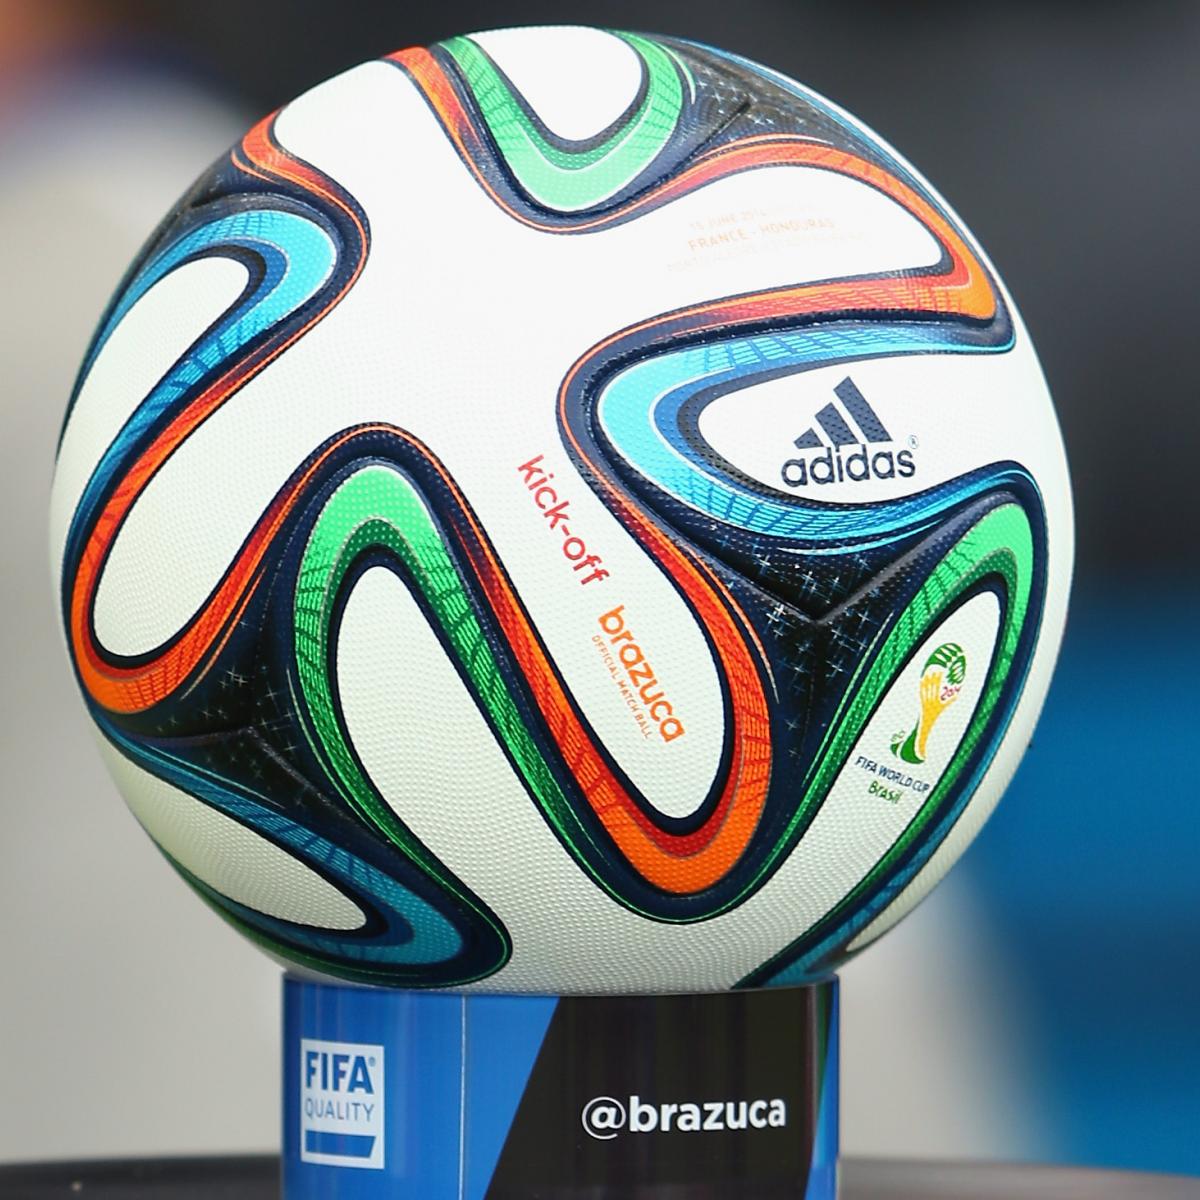 Brazuca Football Official FIFA World Cup Brazil 2014 Soccer, 53% OFF